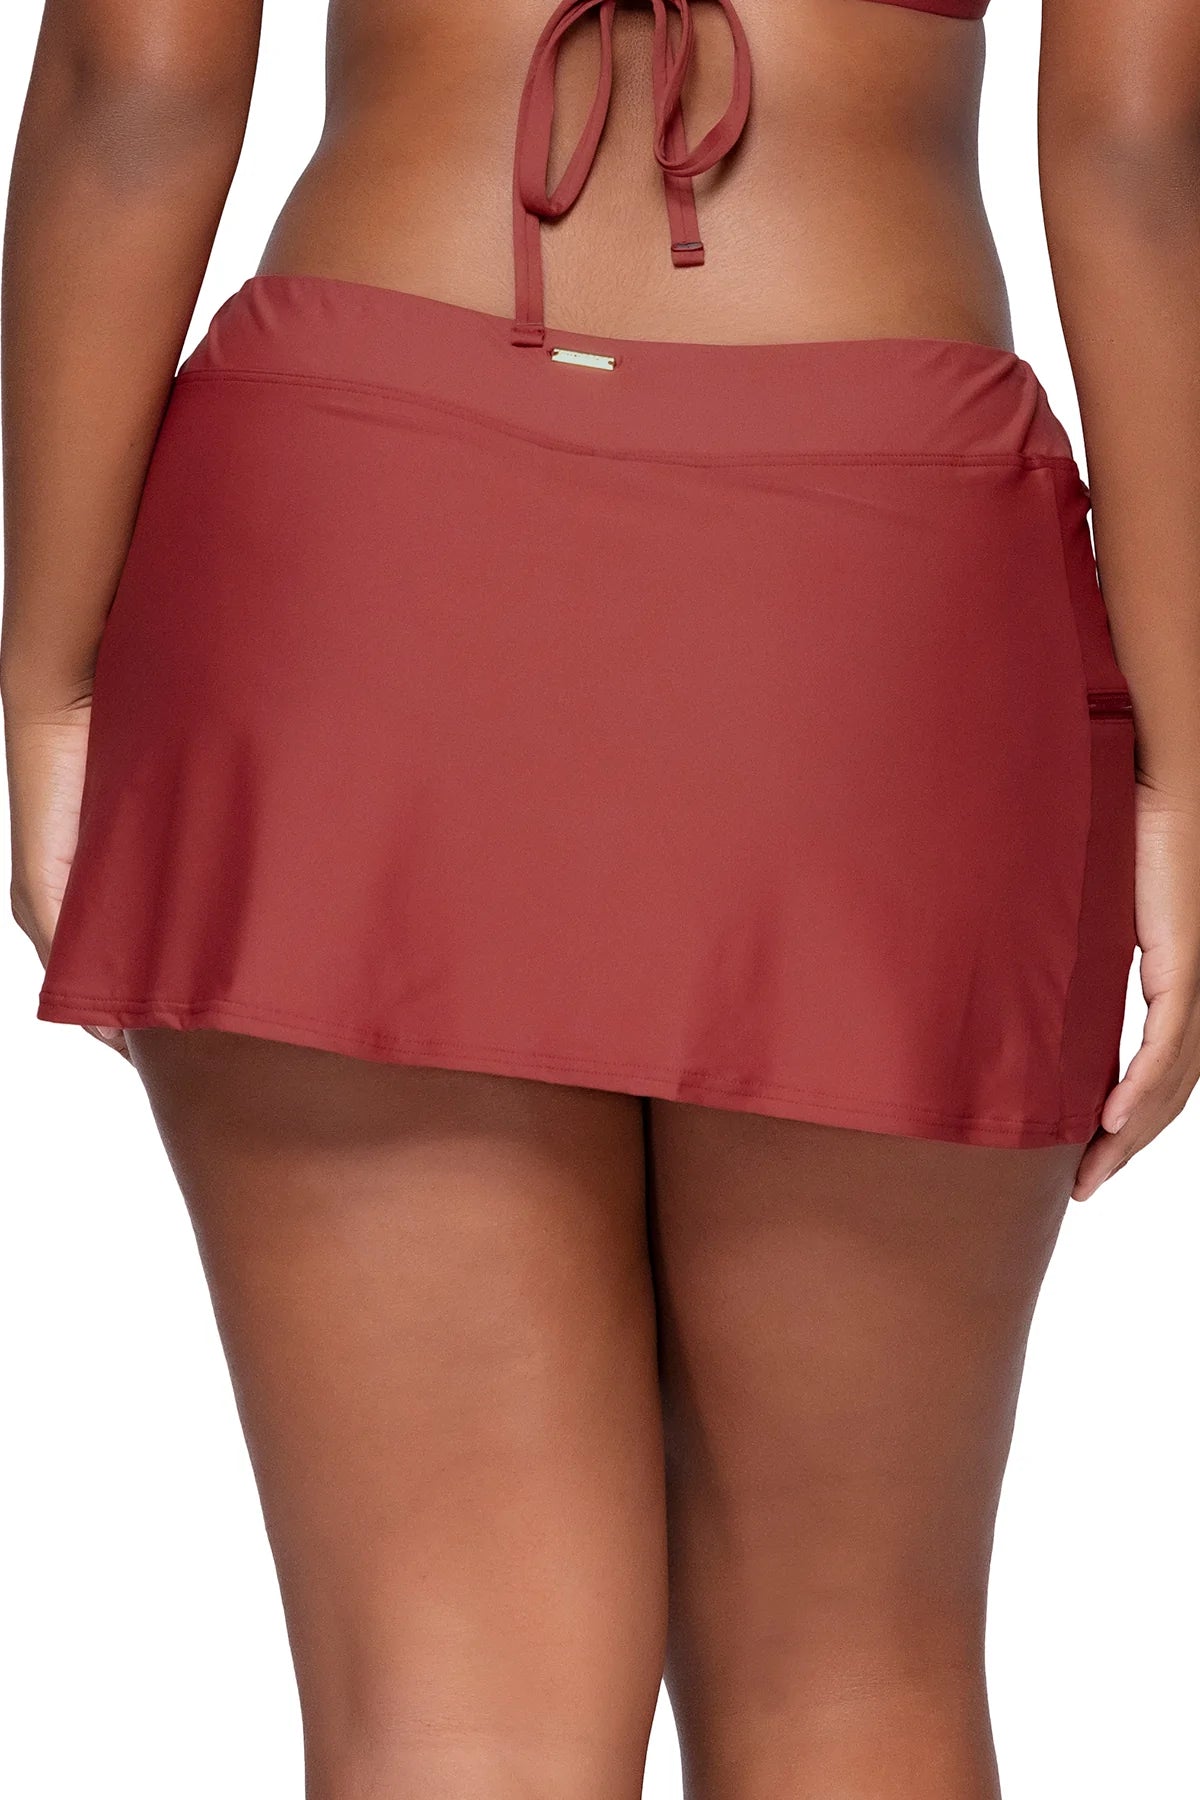 Sunsets Tuscan Red Sporty Swim Skirt